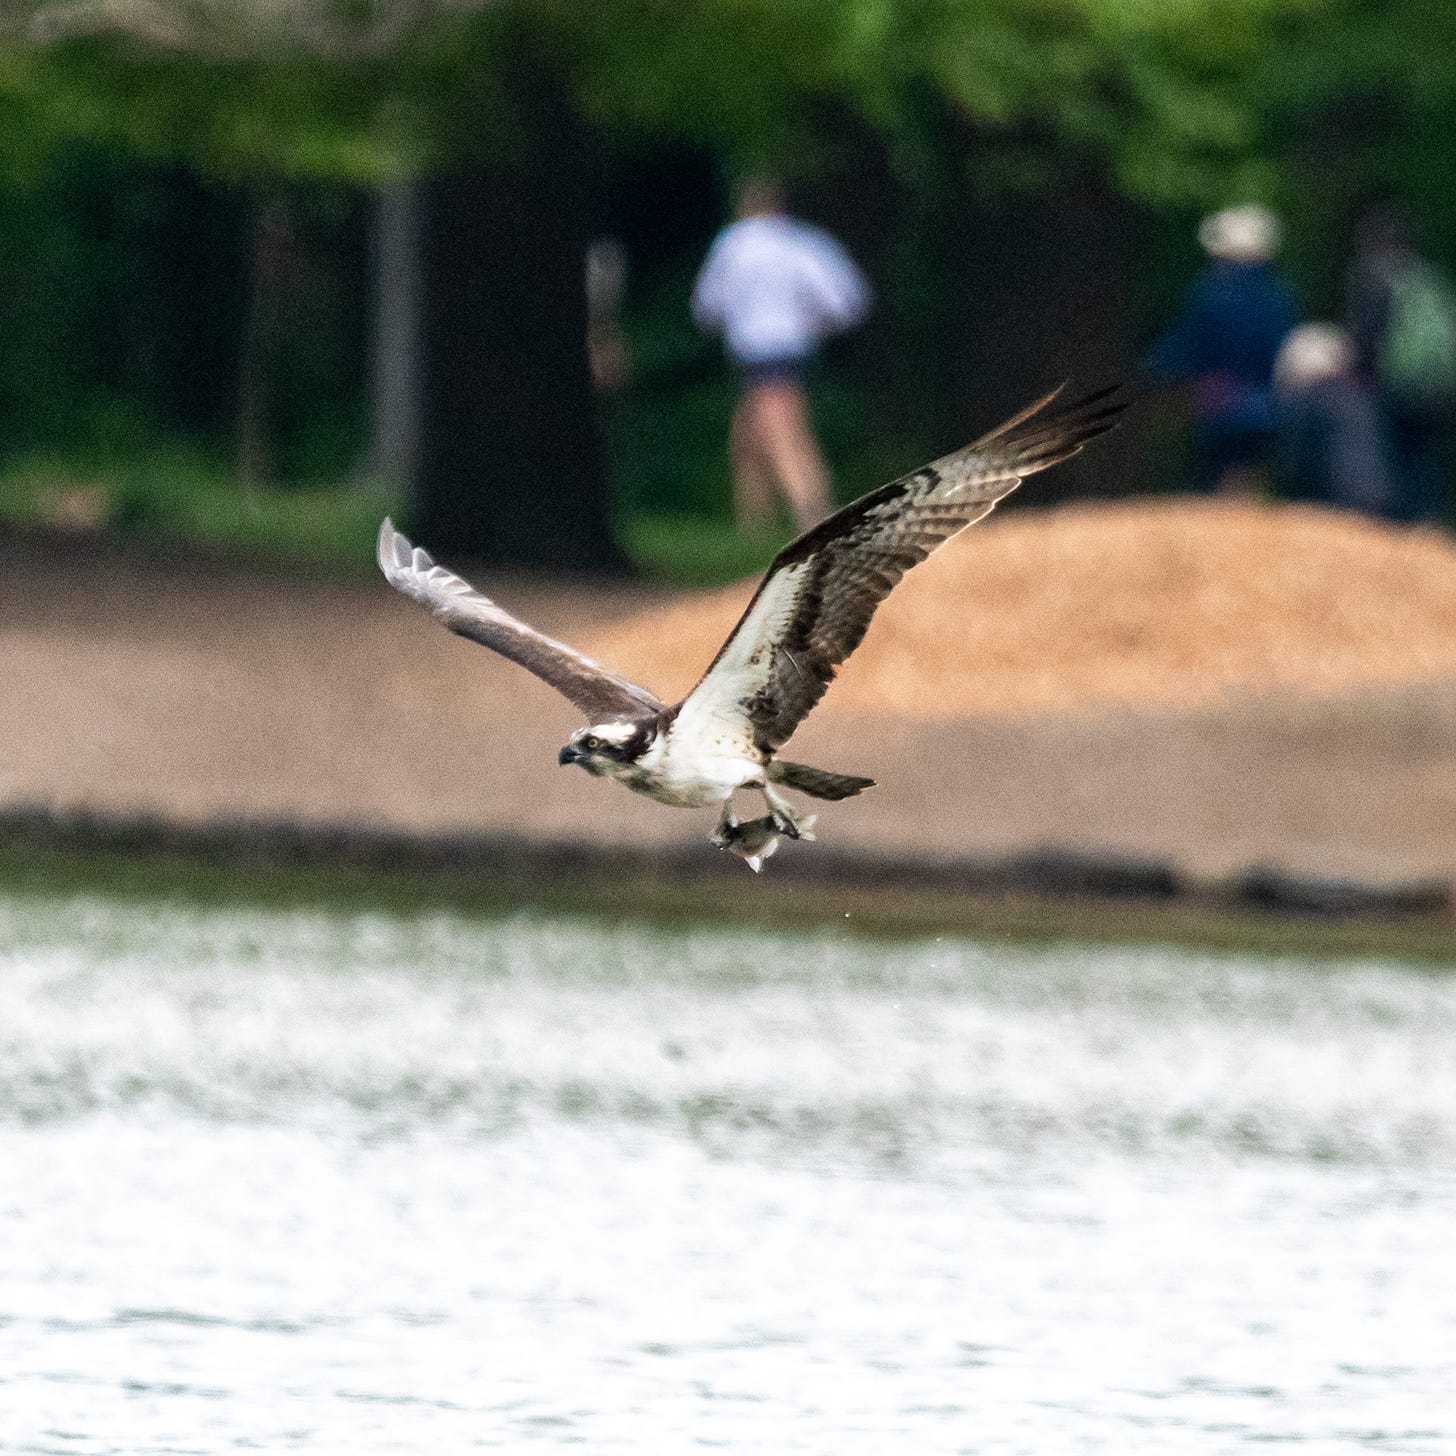 An osprey in flight, carrying a fish